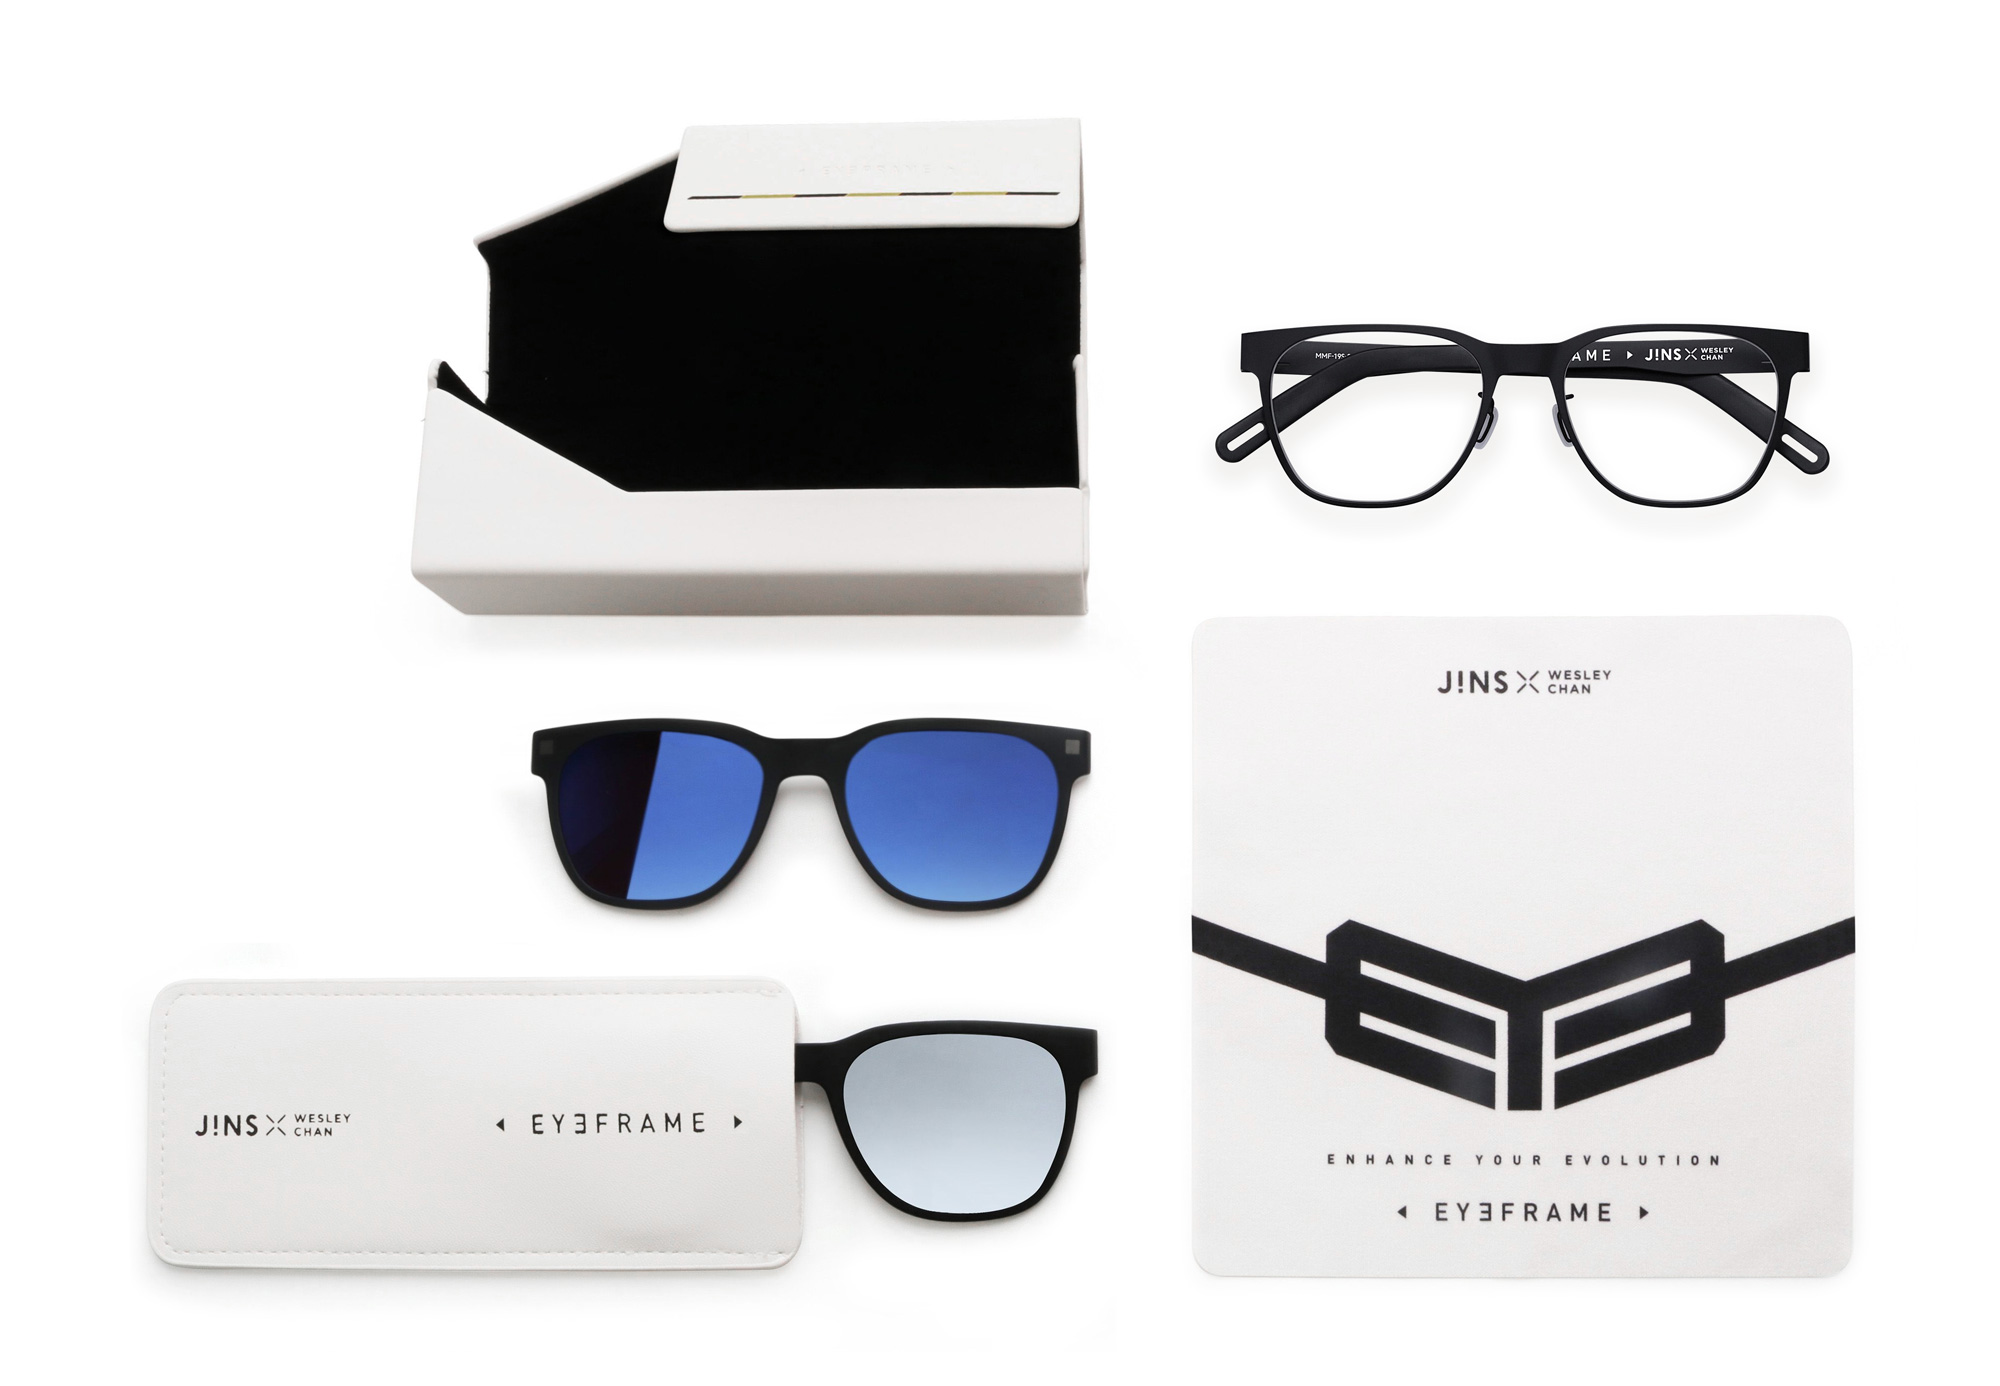 EYEFRAME features a metal frame with a magnetic clip on sunglasses plate. The collection comes with 2 plates, 2 styles of cases, and a branded cleaning cloth